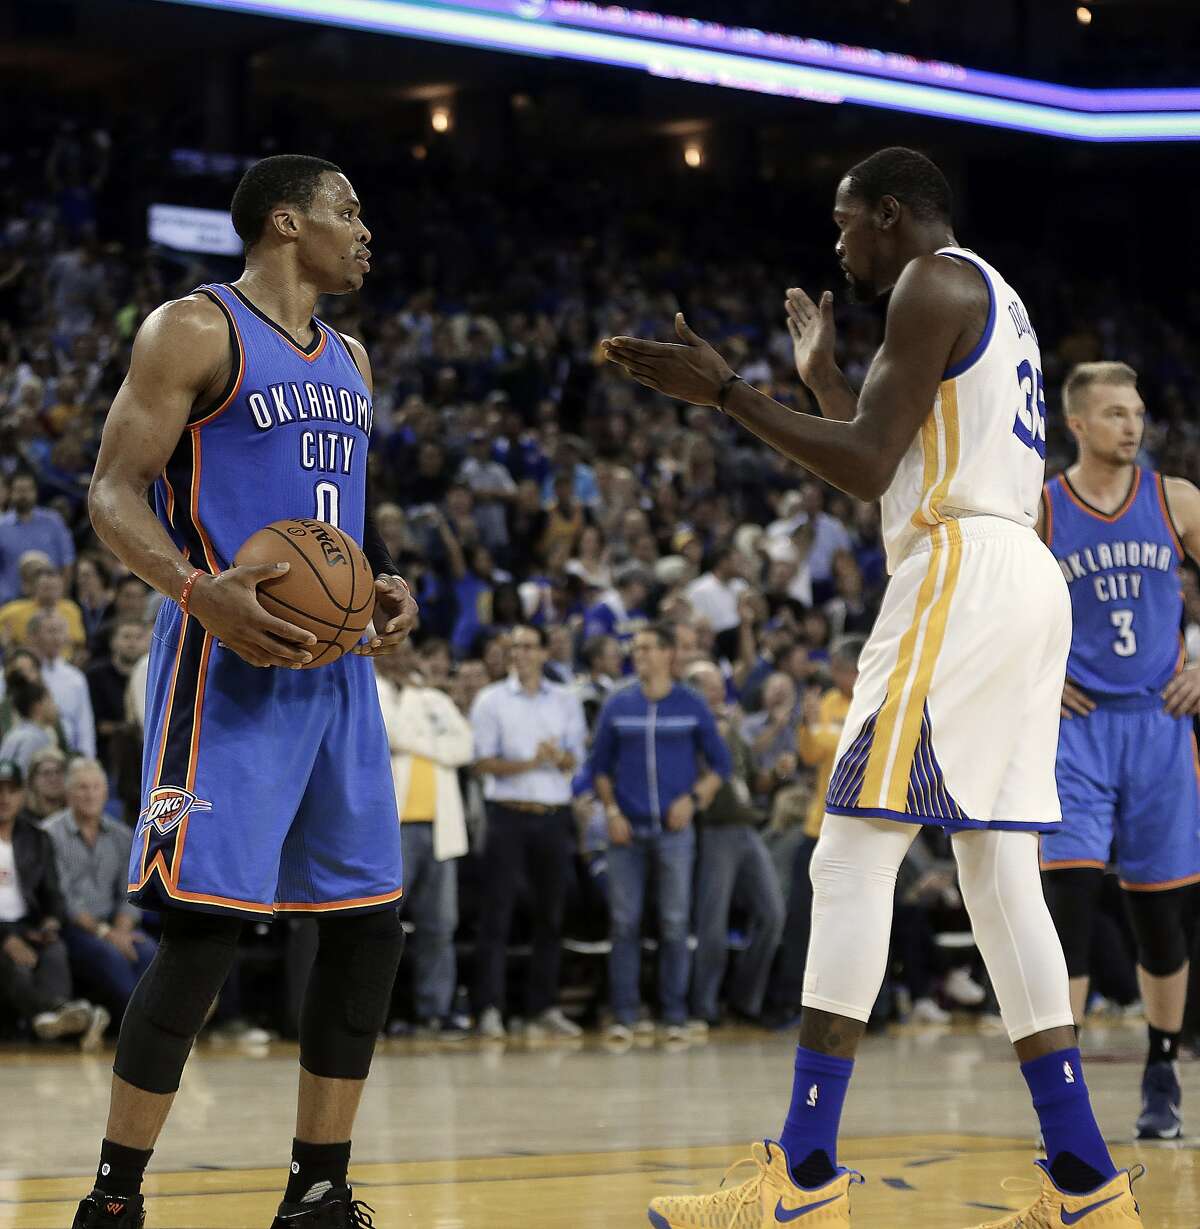 Golden State Warriors' Kevin Durant, right, celebrates in front of Oklahoma City Thunder guard Russell Westbrook (0) during the first half of an NBA basketball game Thursday, Nov. 3, 2016, in Oakland, Calif. (AP Photo/Ben Margot)